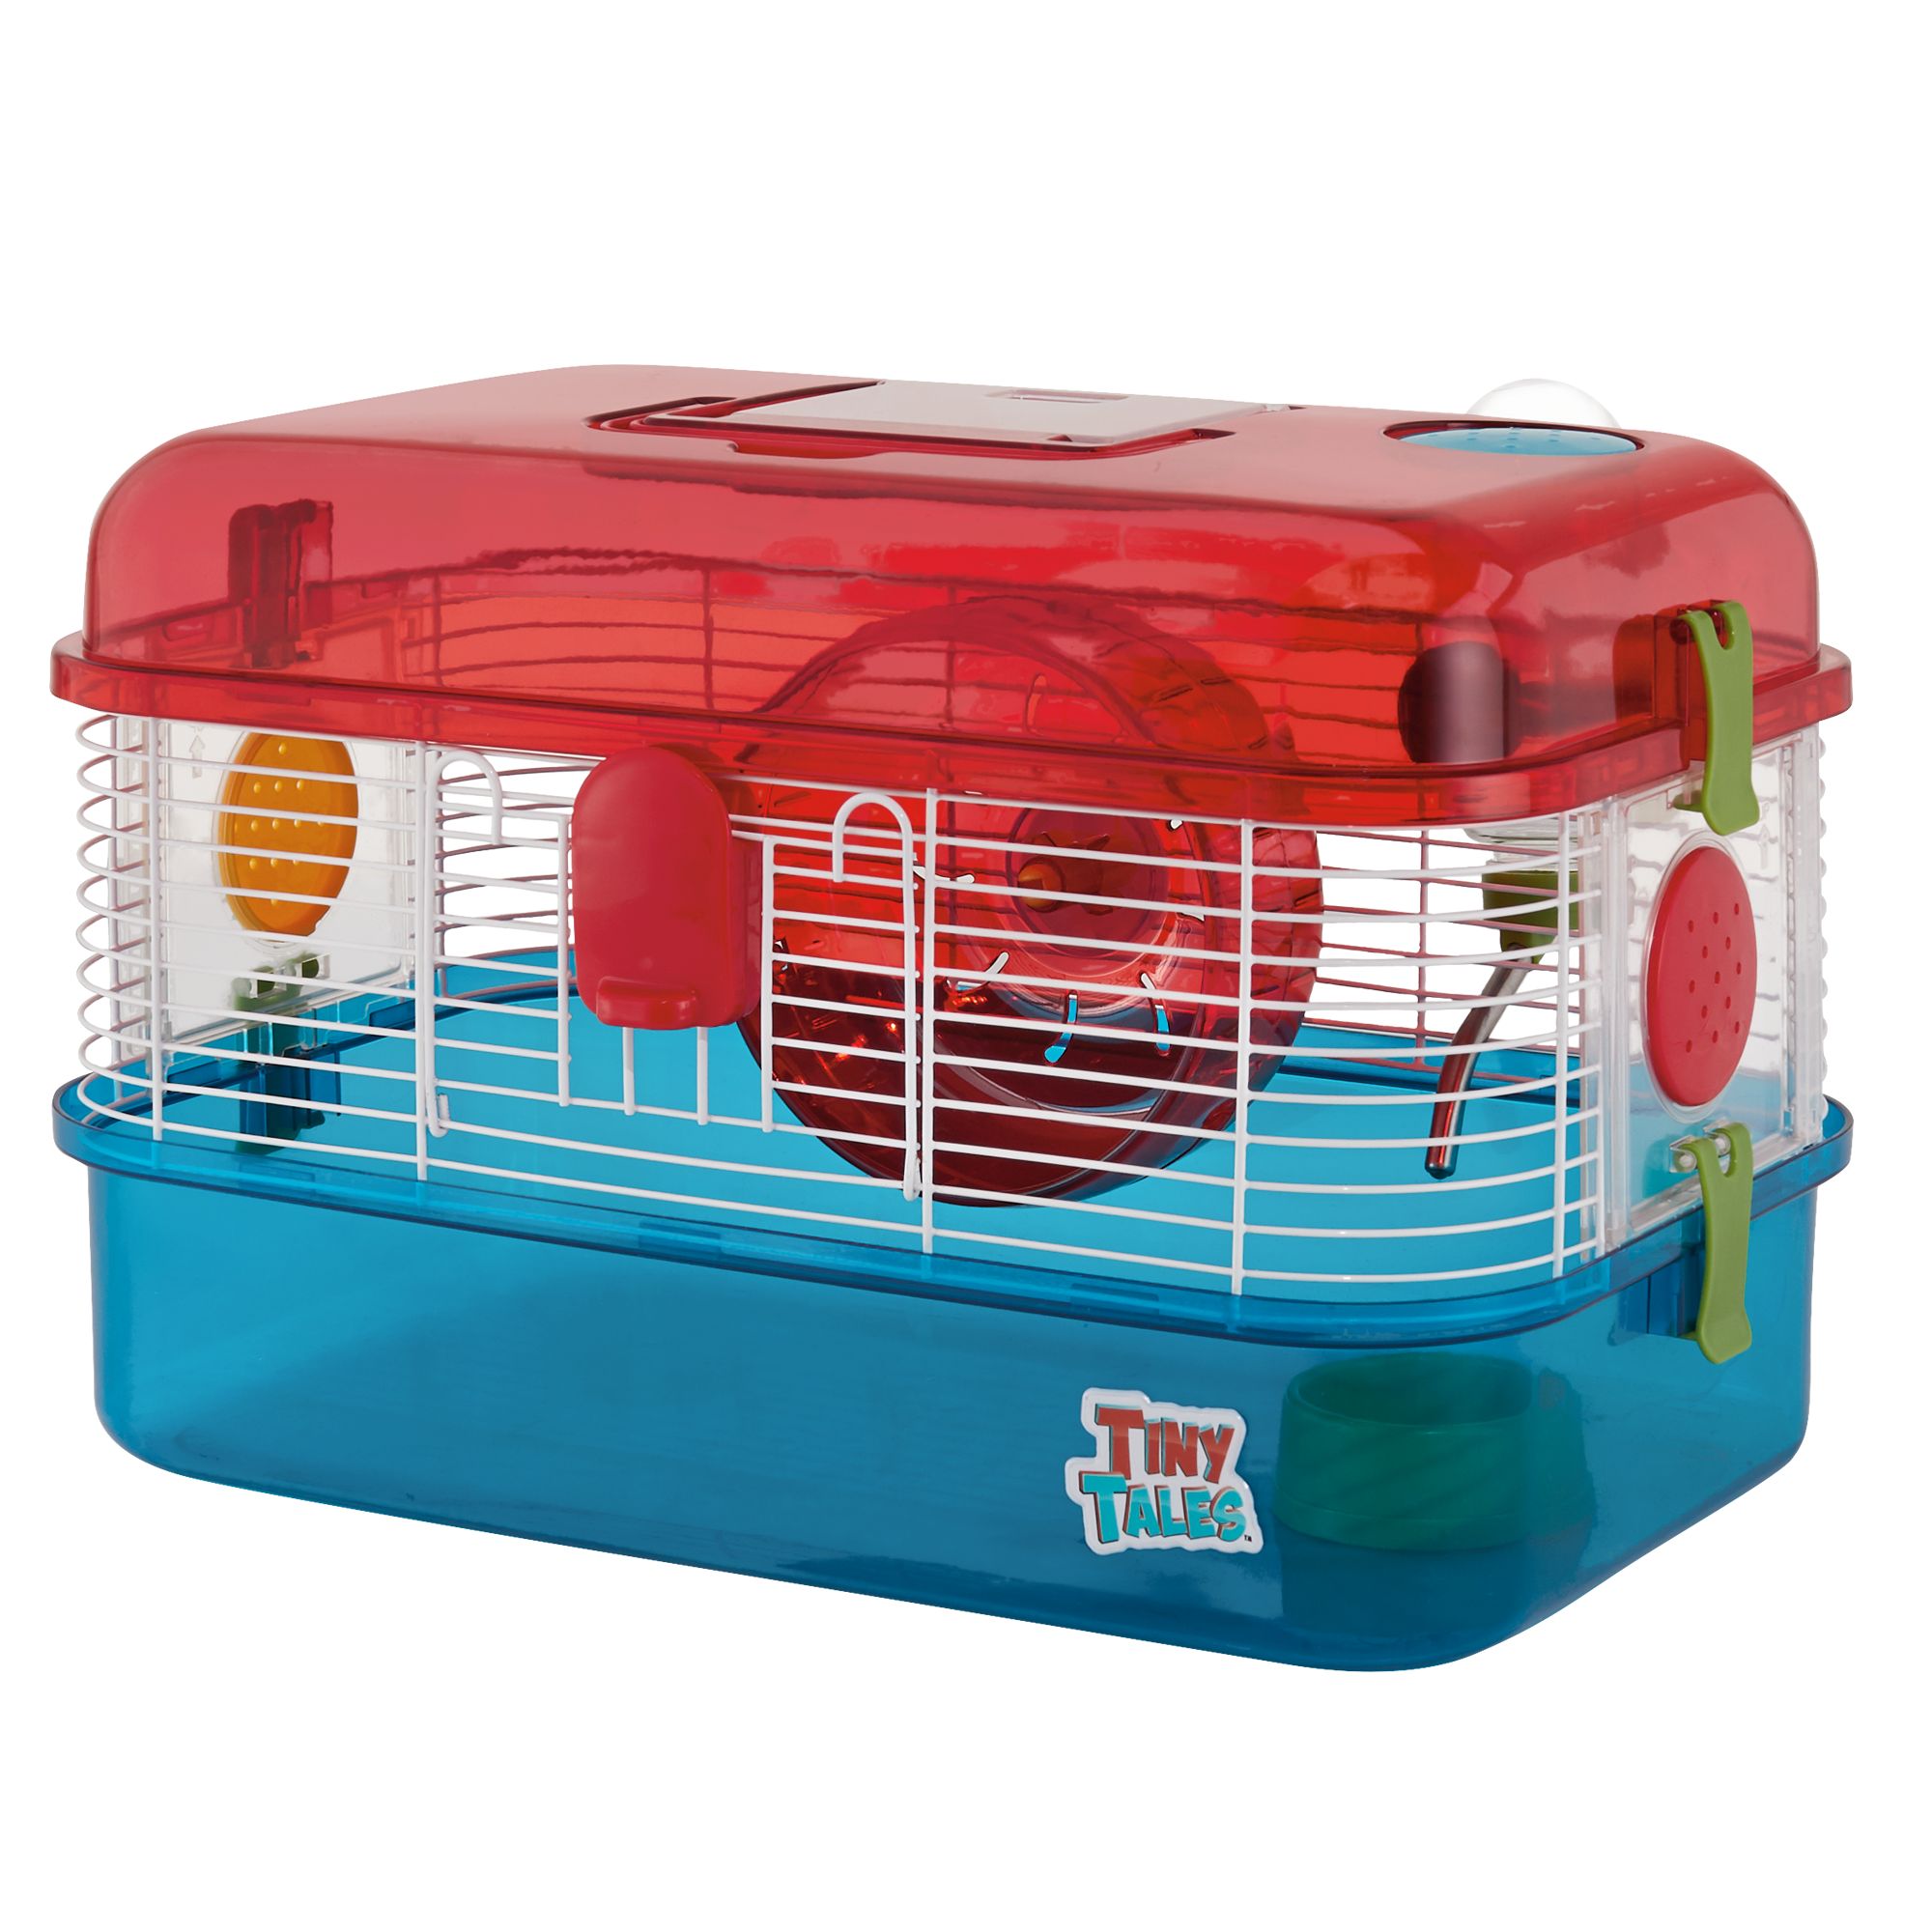 tiny tales hamster cage